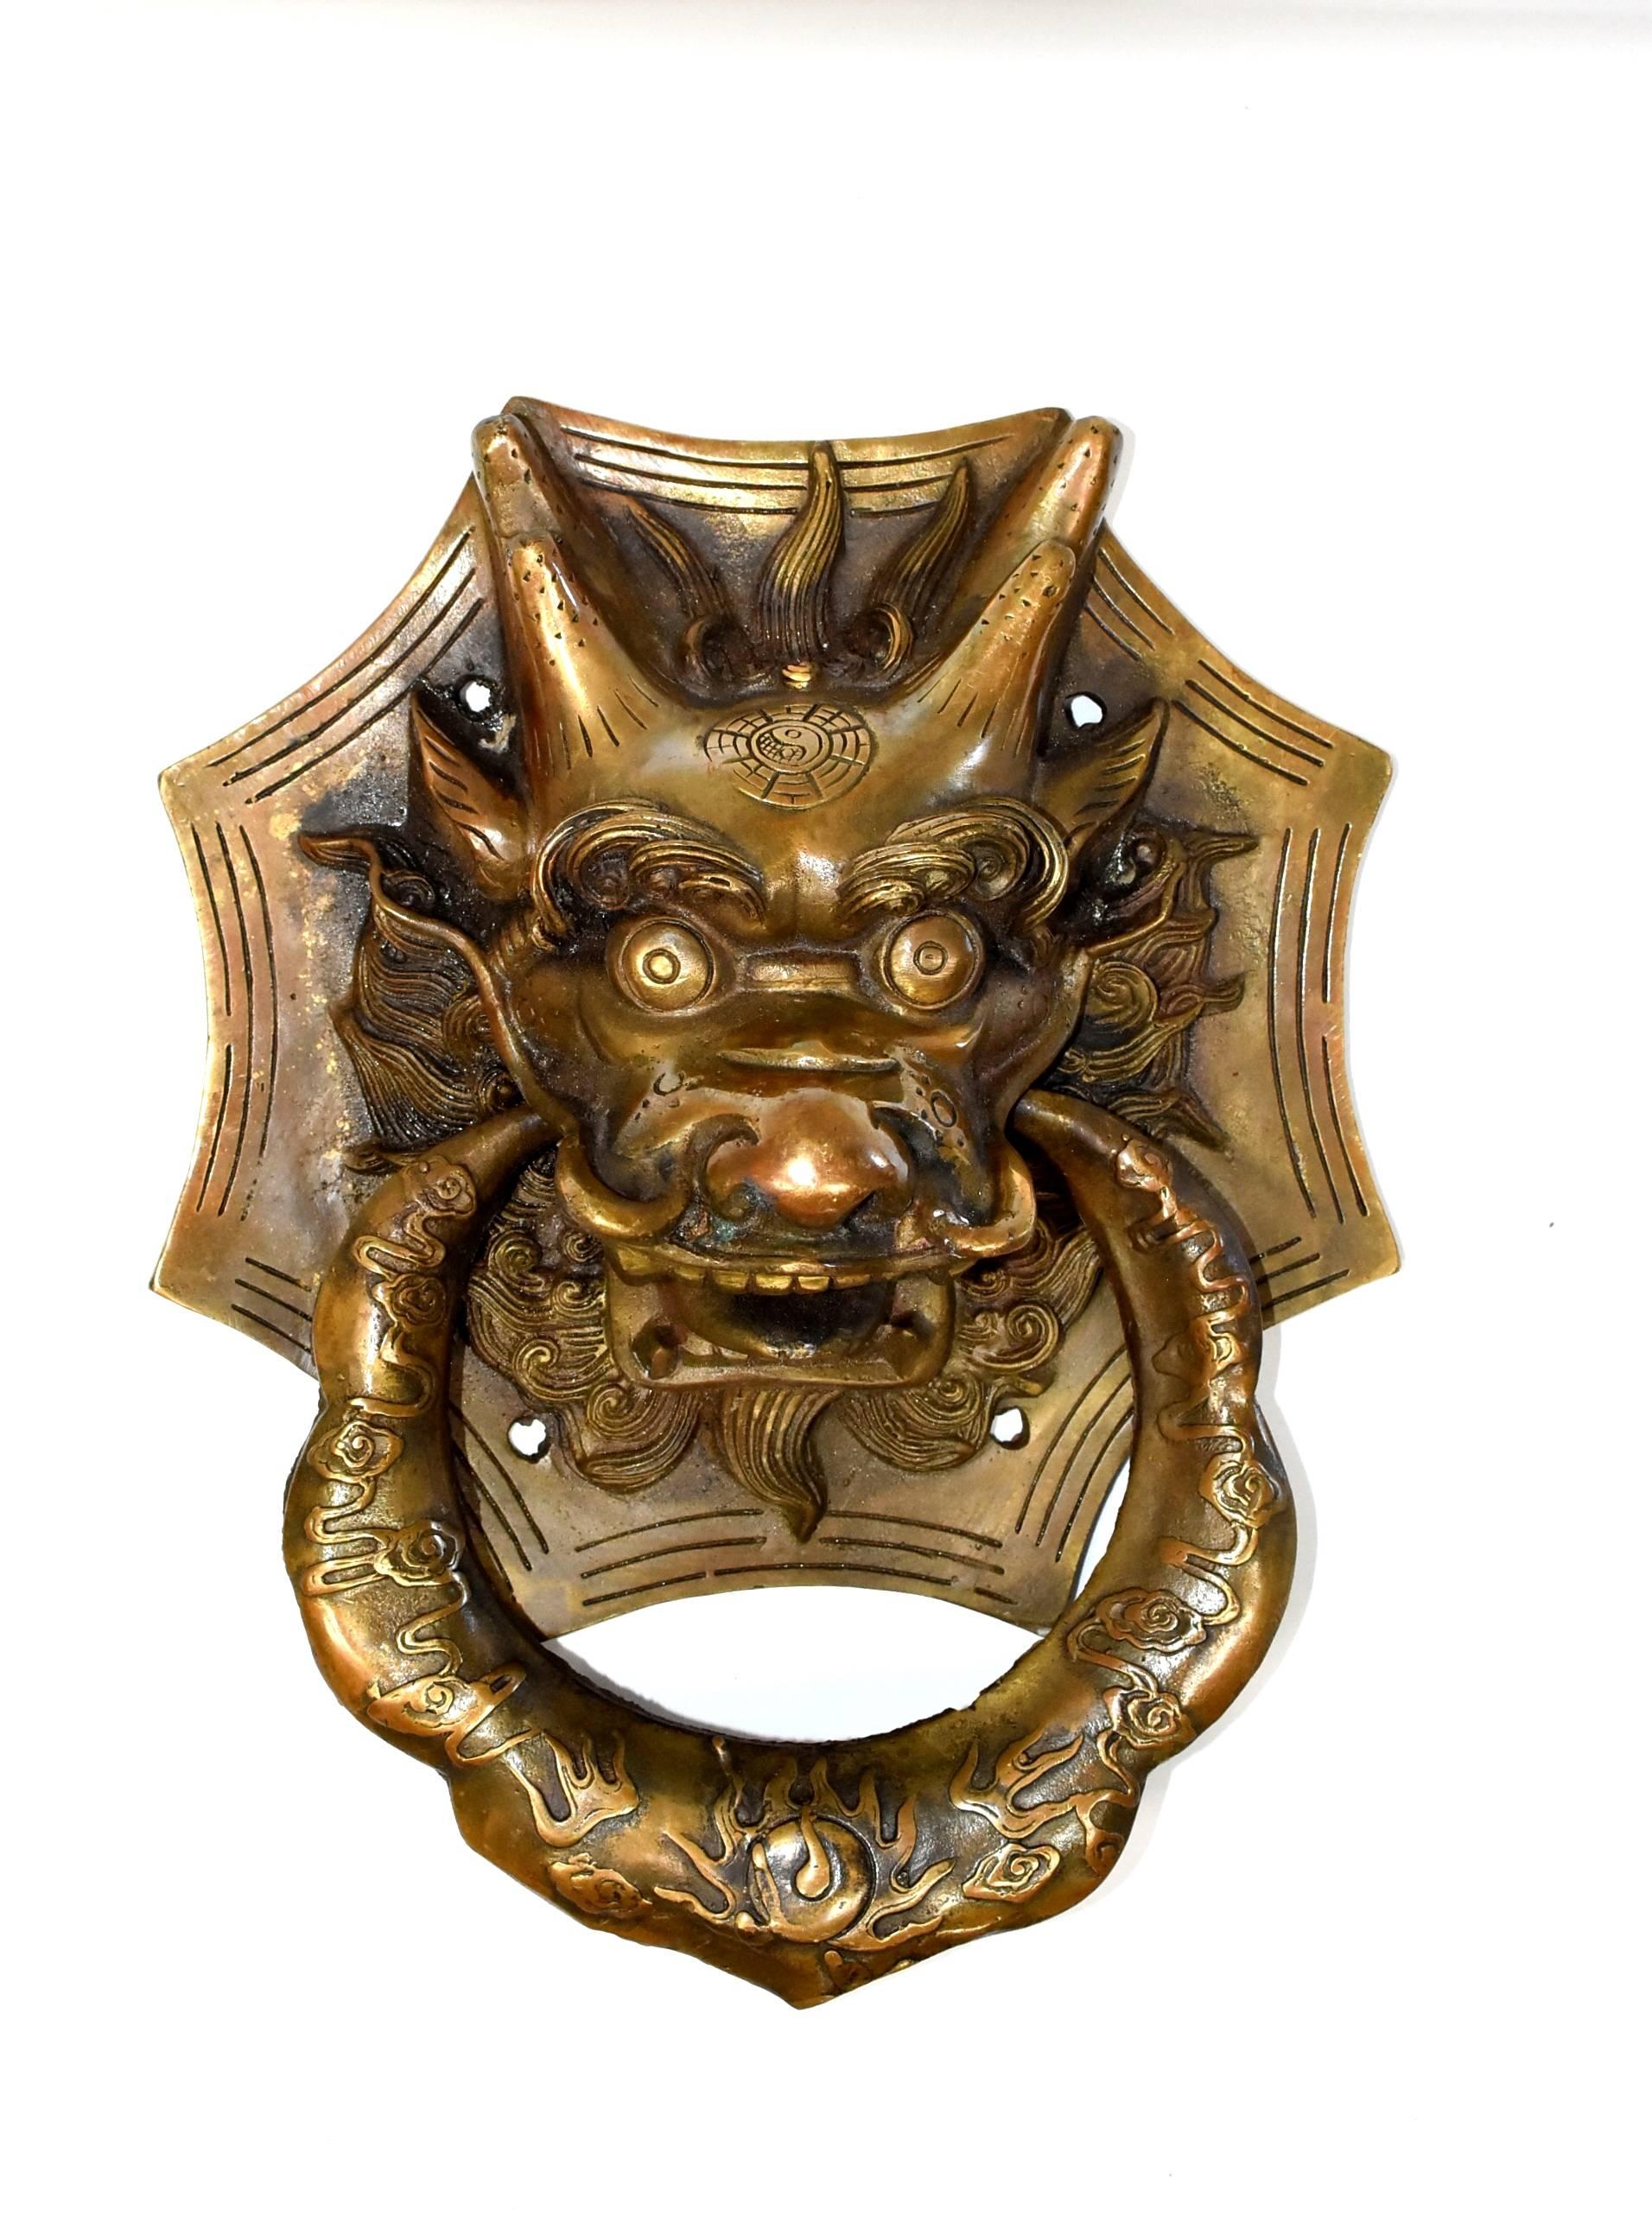 Our brass knockers can be used as door knockers or hand towel rings. Fine craftsmanship depicts the ancient mythical animals with a high level of artistic expression. Dragon is the symbol of Chinese emperor, it represents power, prosperity, good